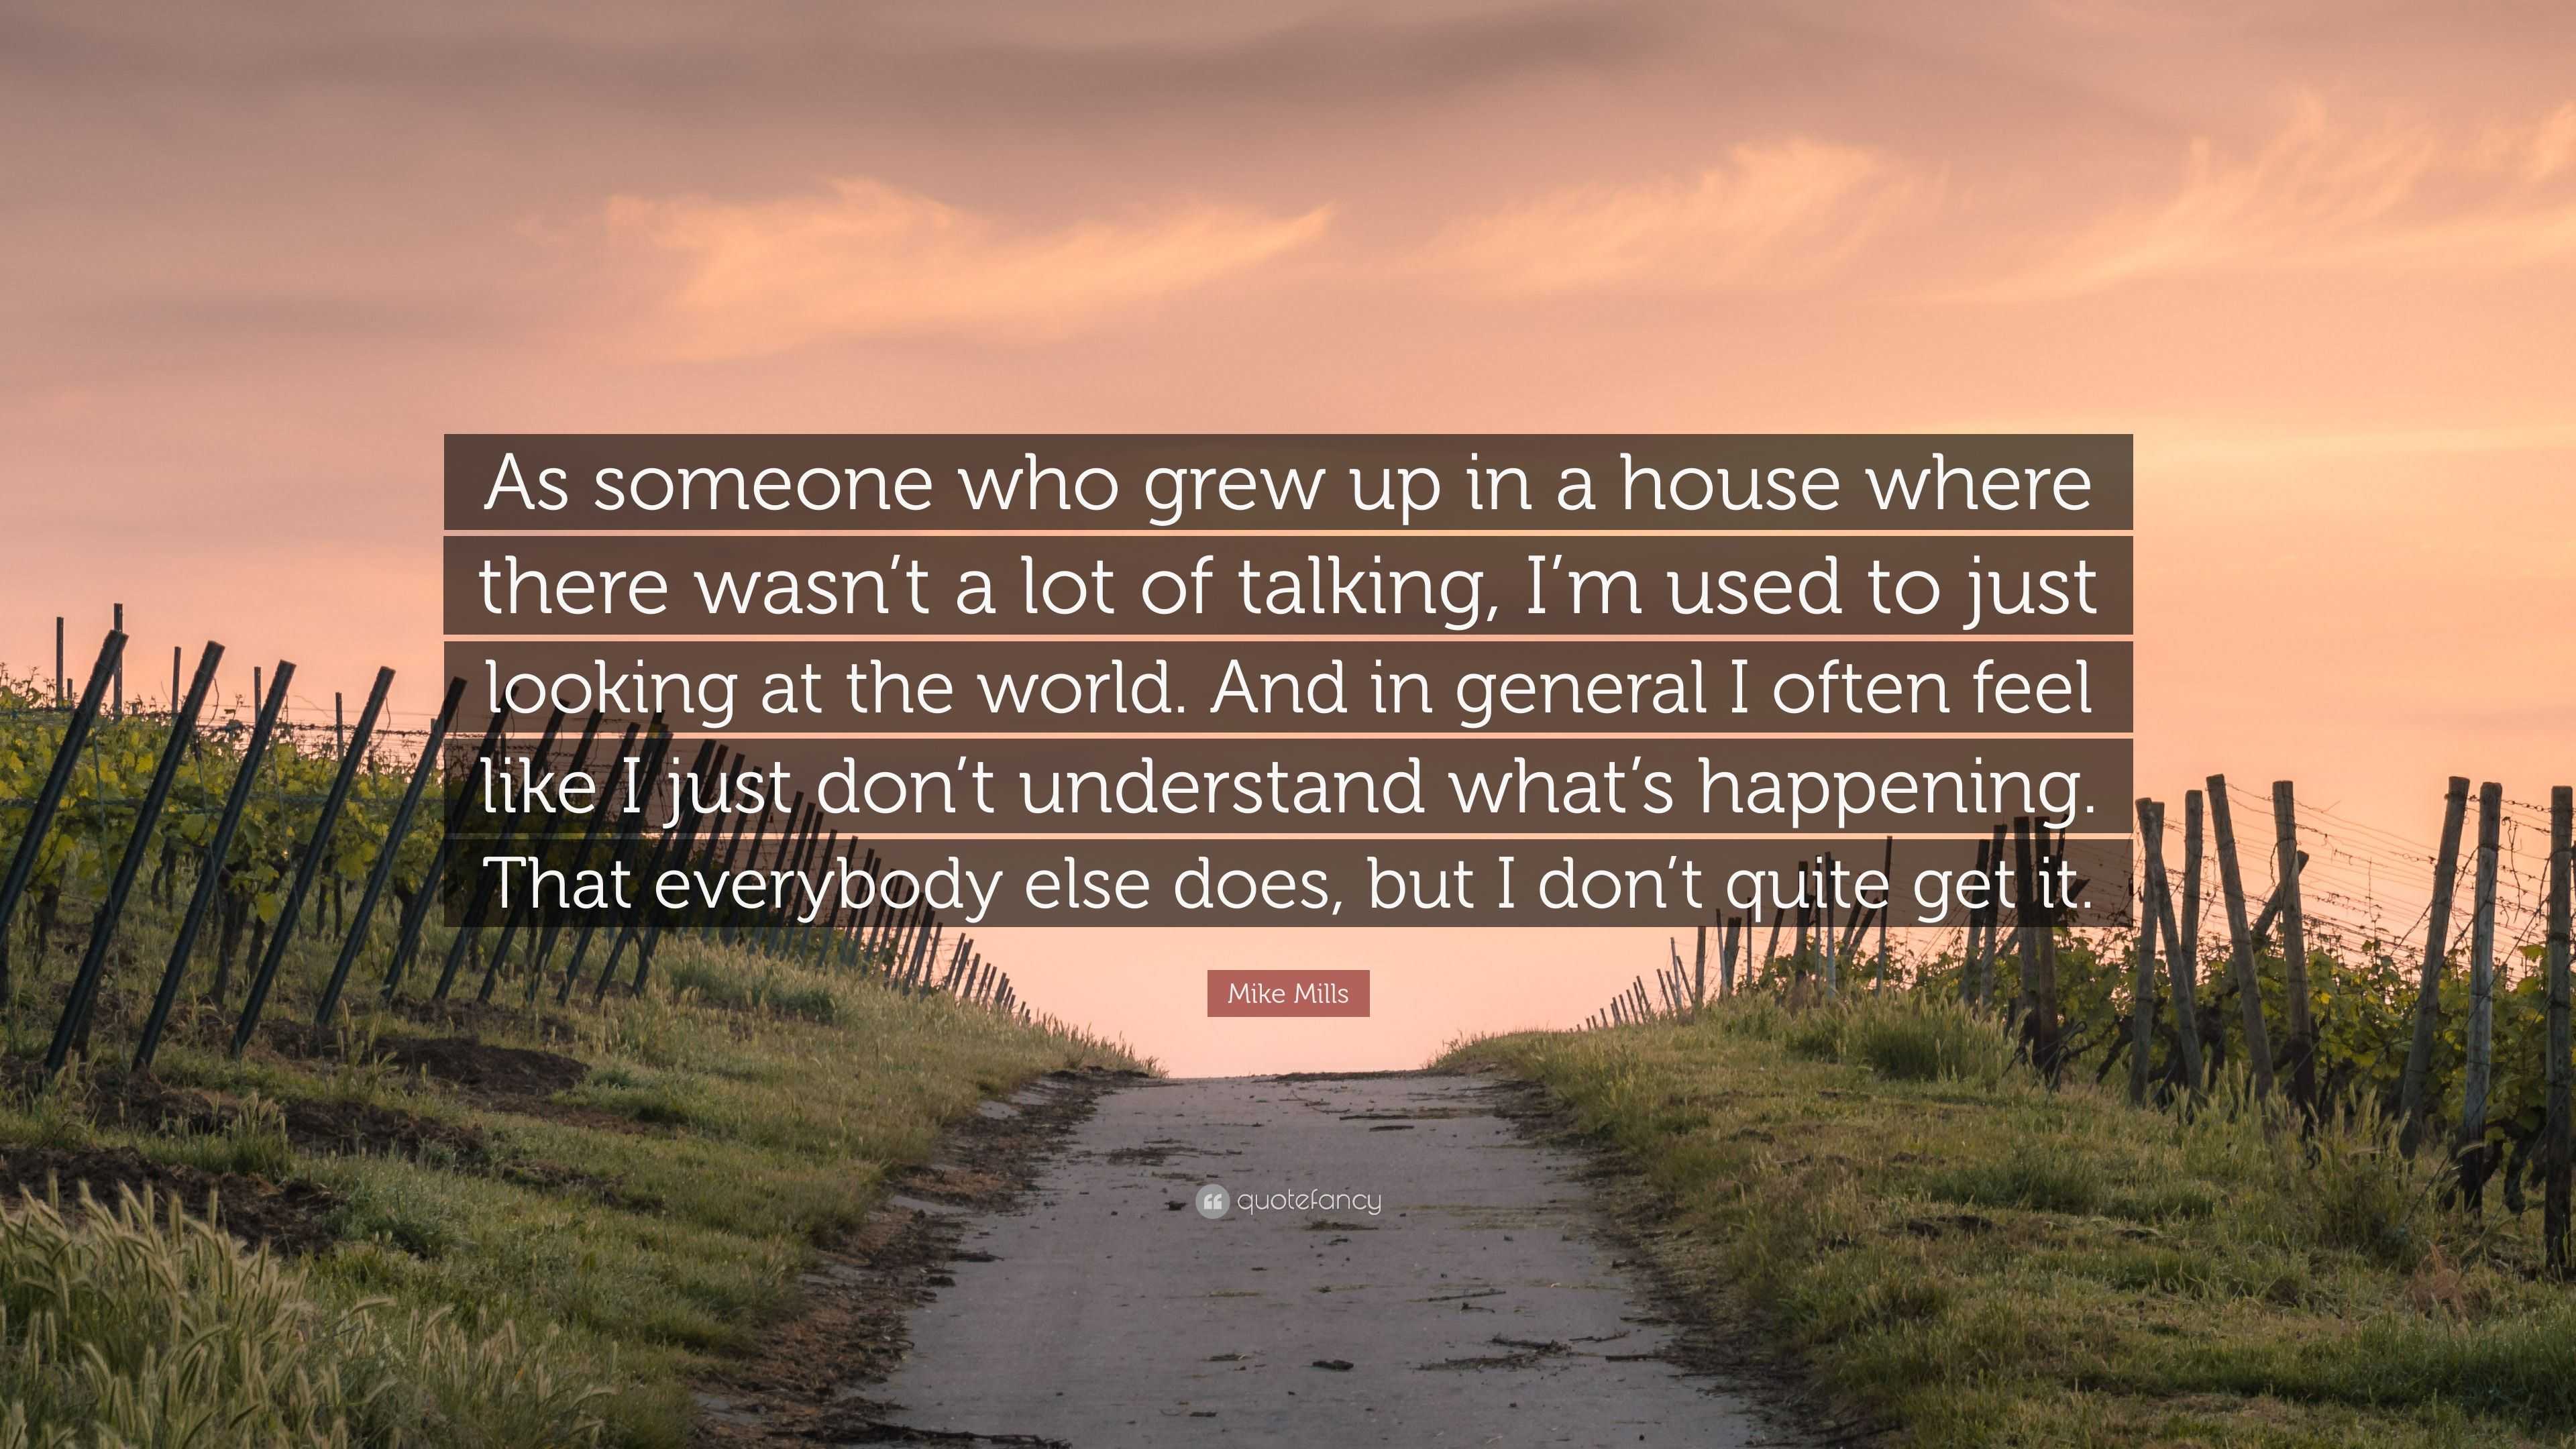 Mike Mills Quote: “As someone who grew up in a house where there wasn’t ...